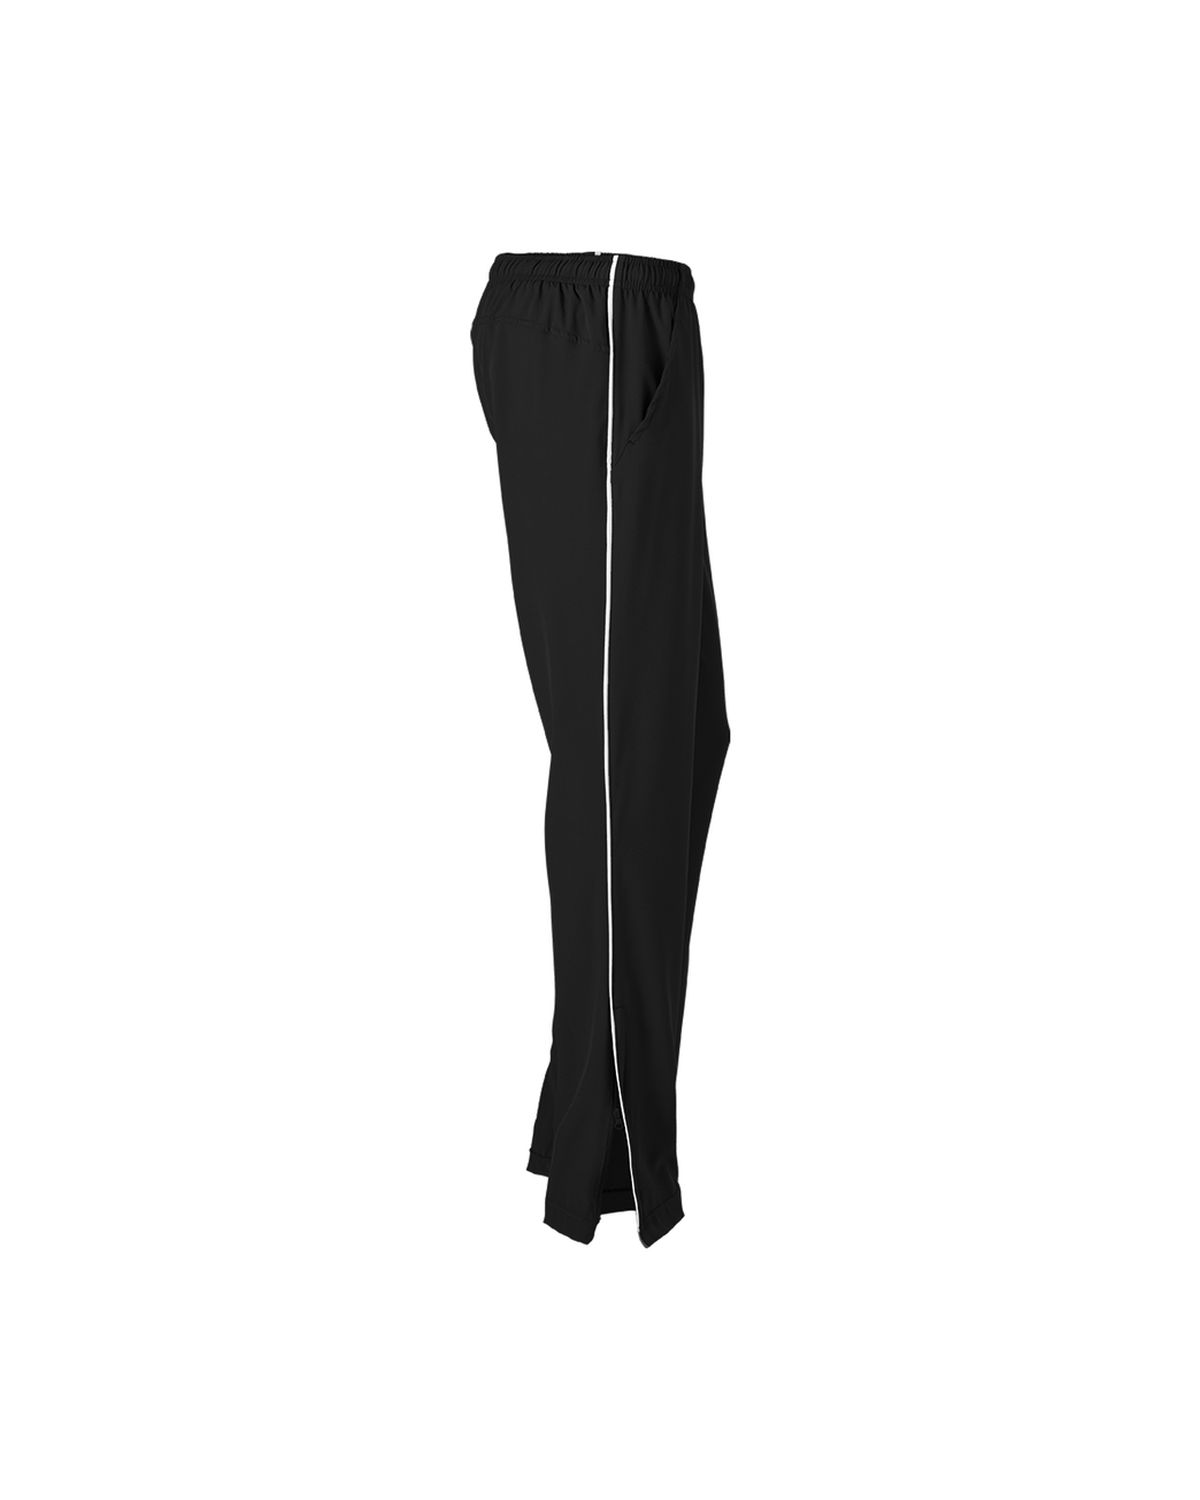 'Soffe 1025V Womens Game Time Warm Up Pant'